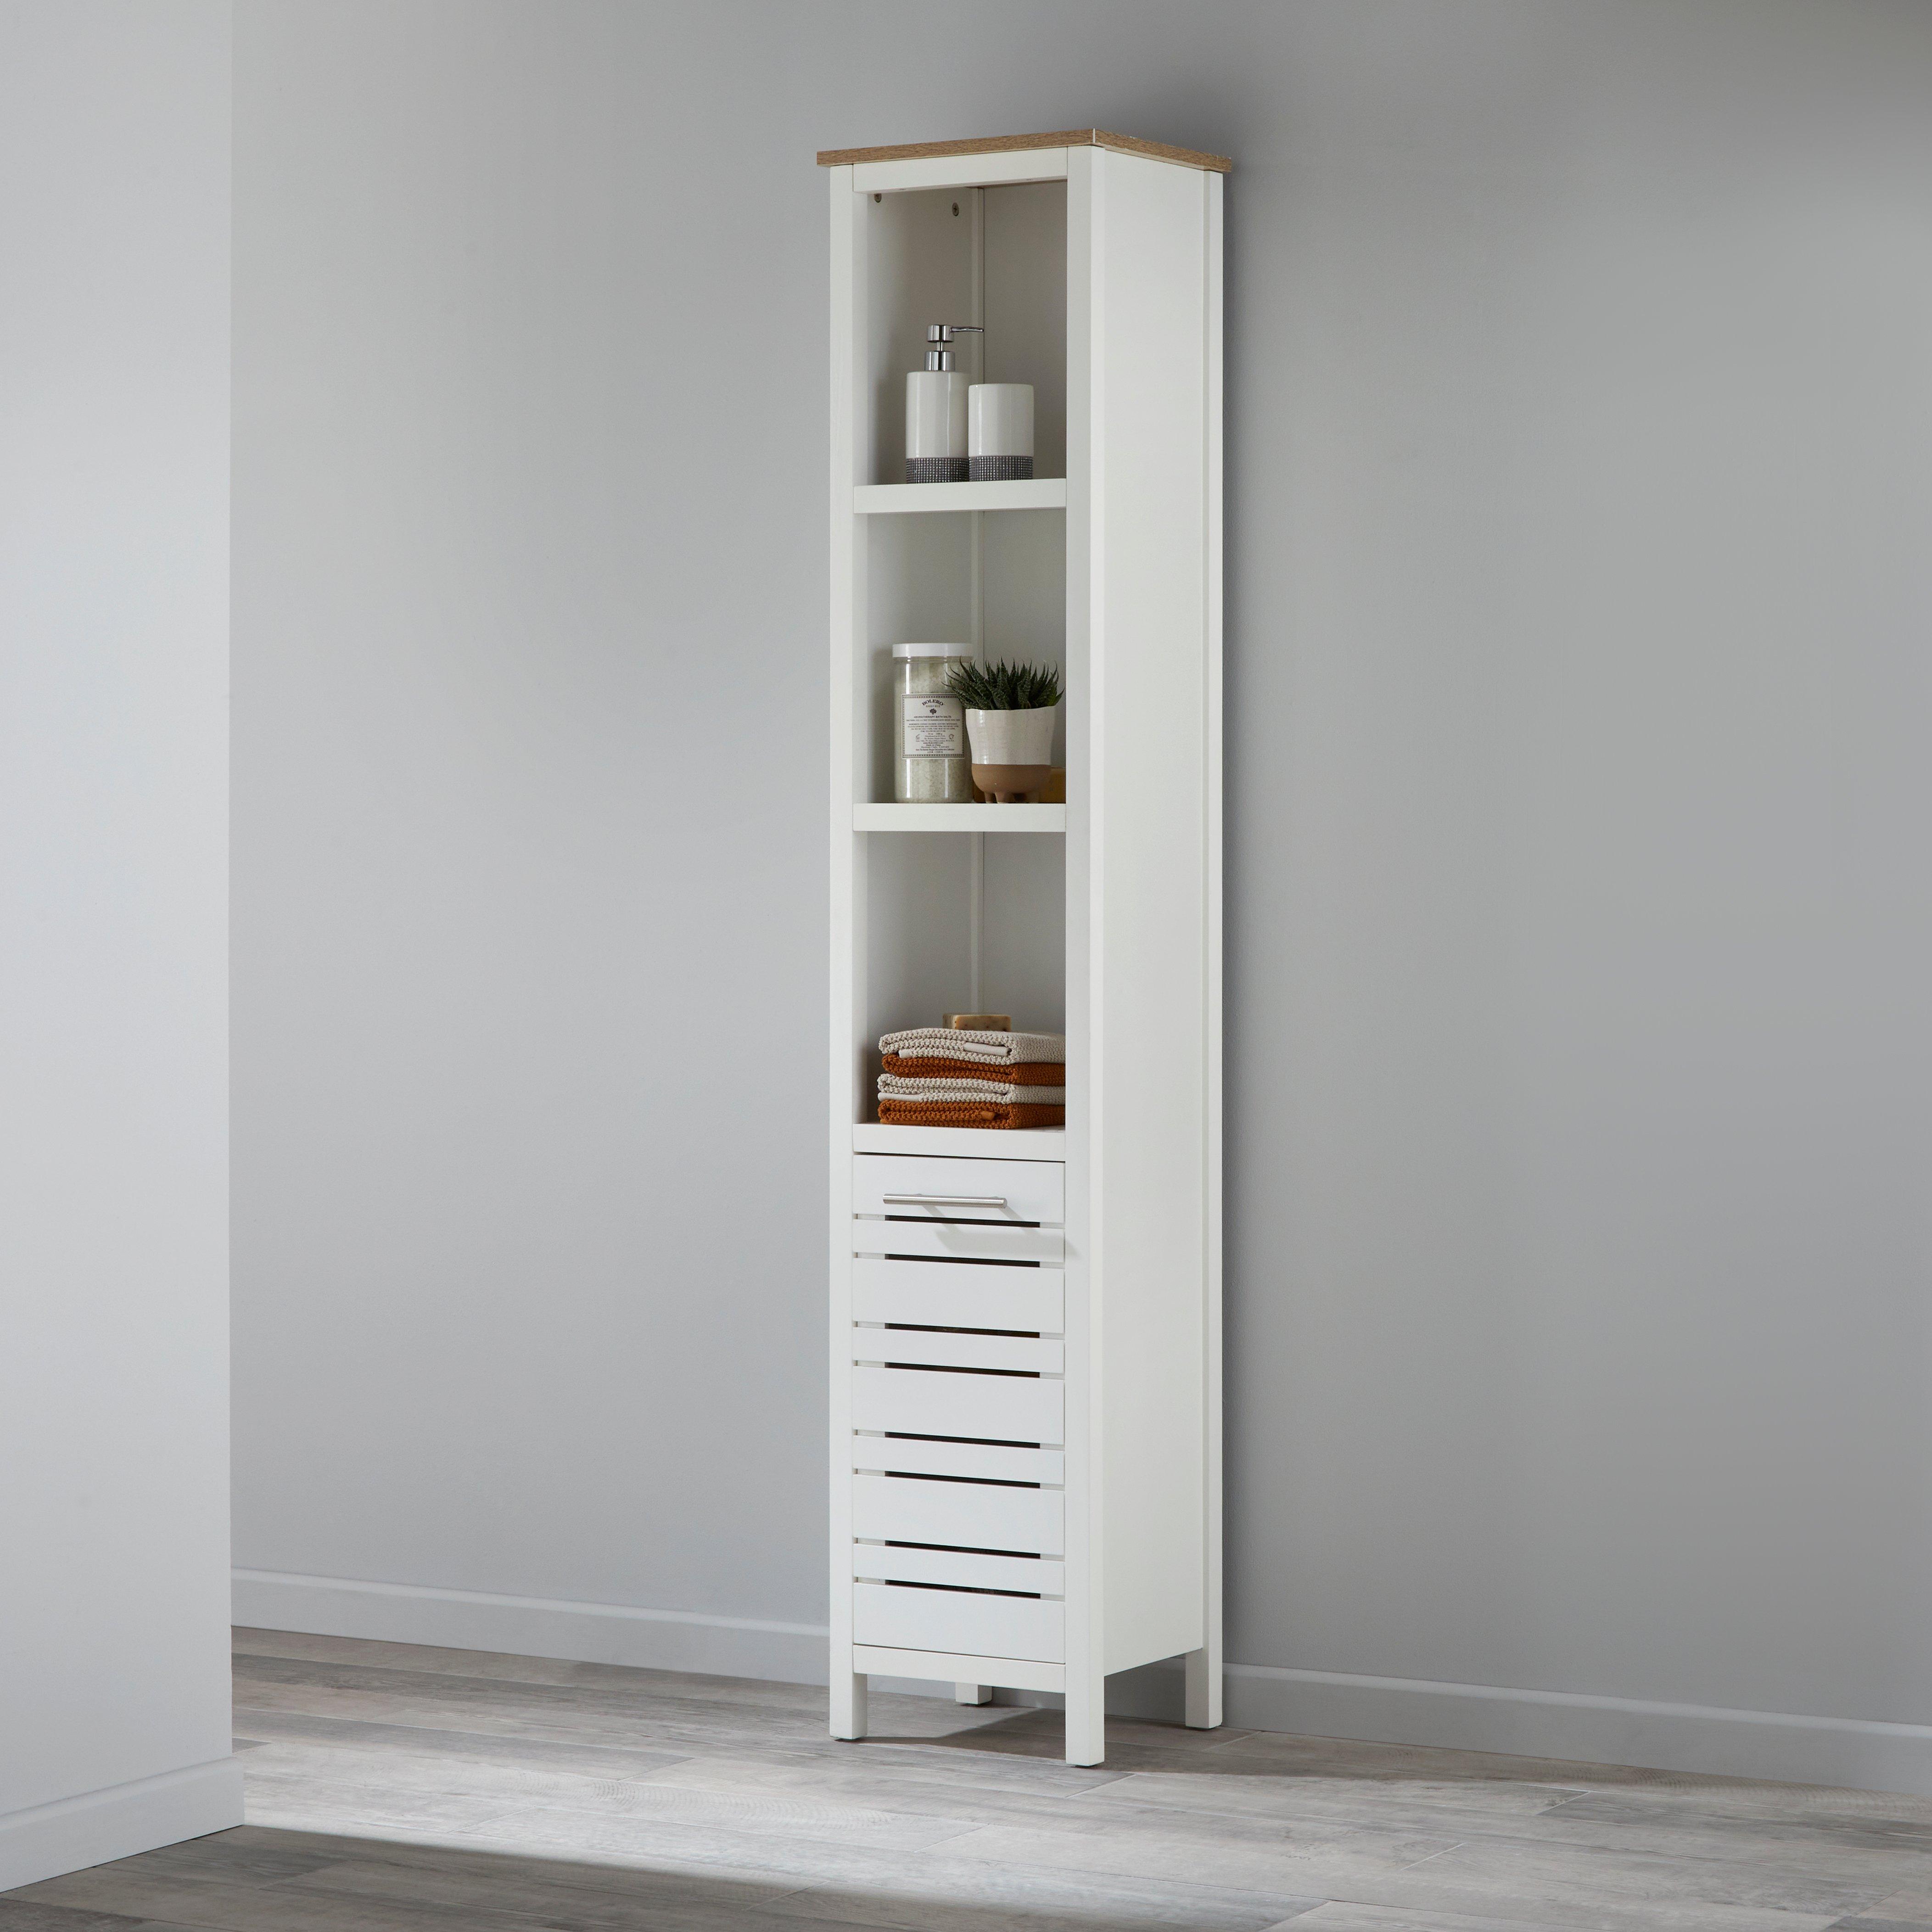 Two-Toned White Bathroom Tallboy Cabinet